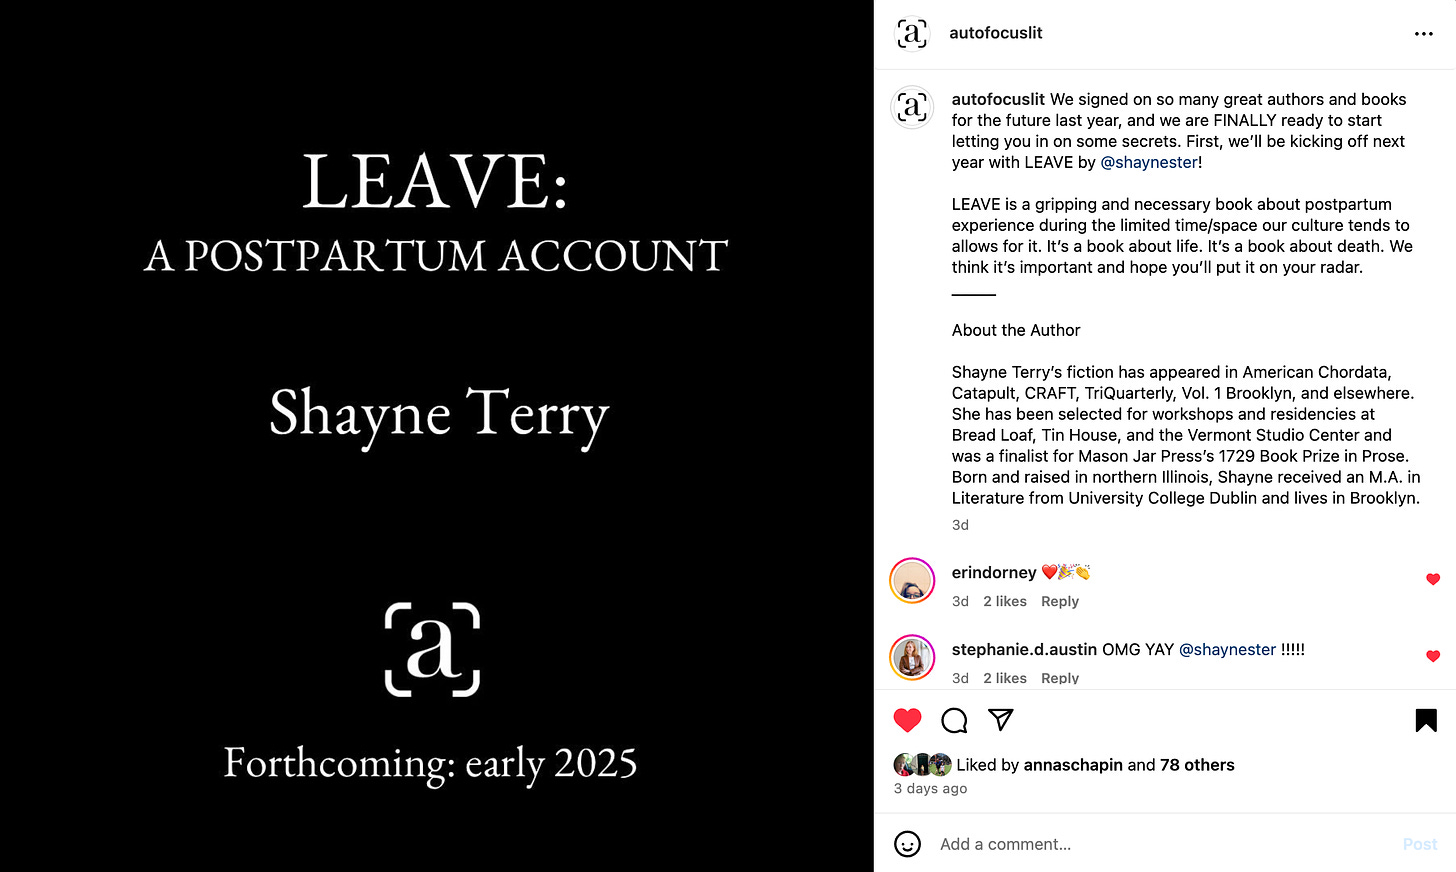 An Instagram post from Autofocus that reads: "Leave: A Postpartum Account", Shayne Terry, Forthcoming early 2025